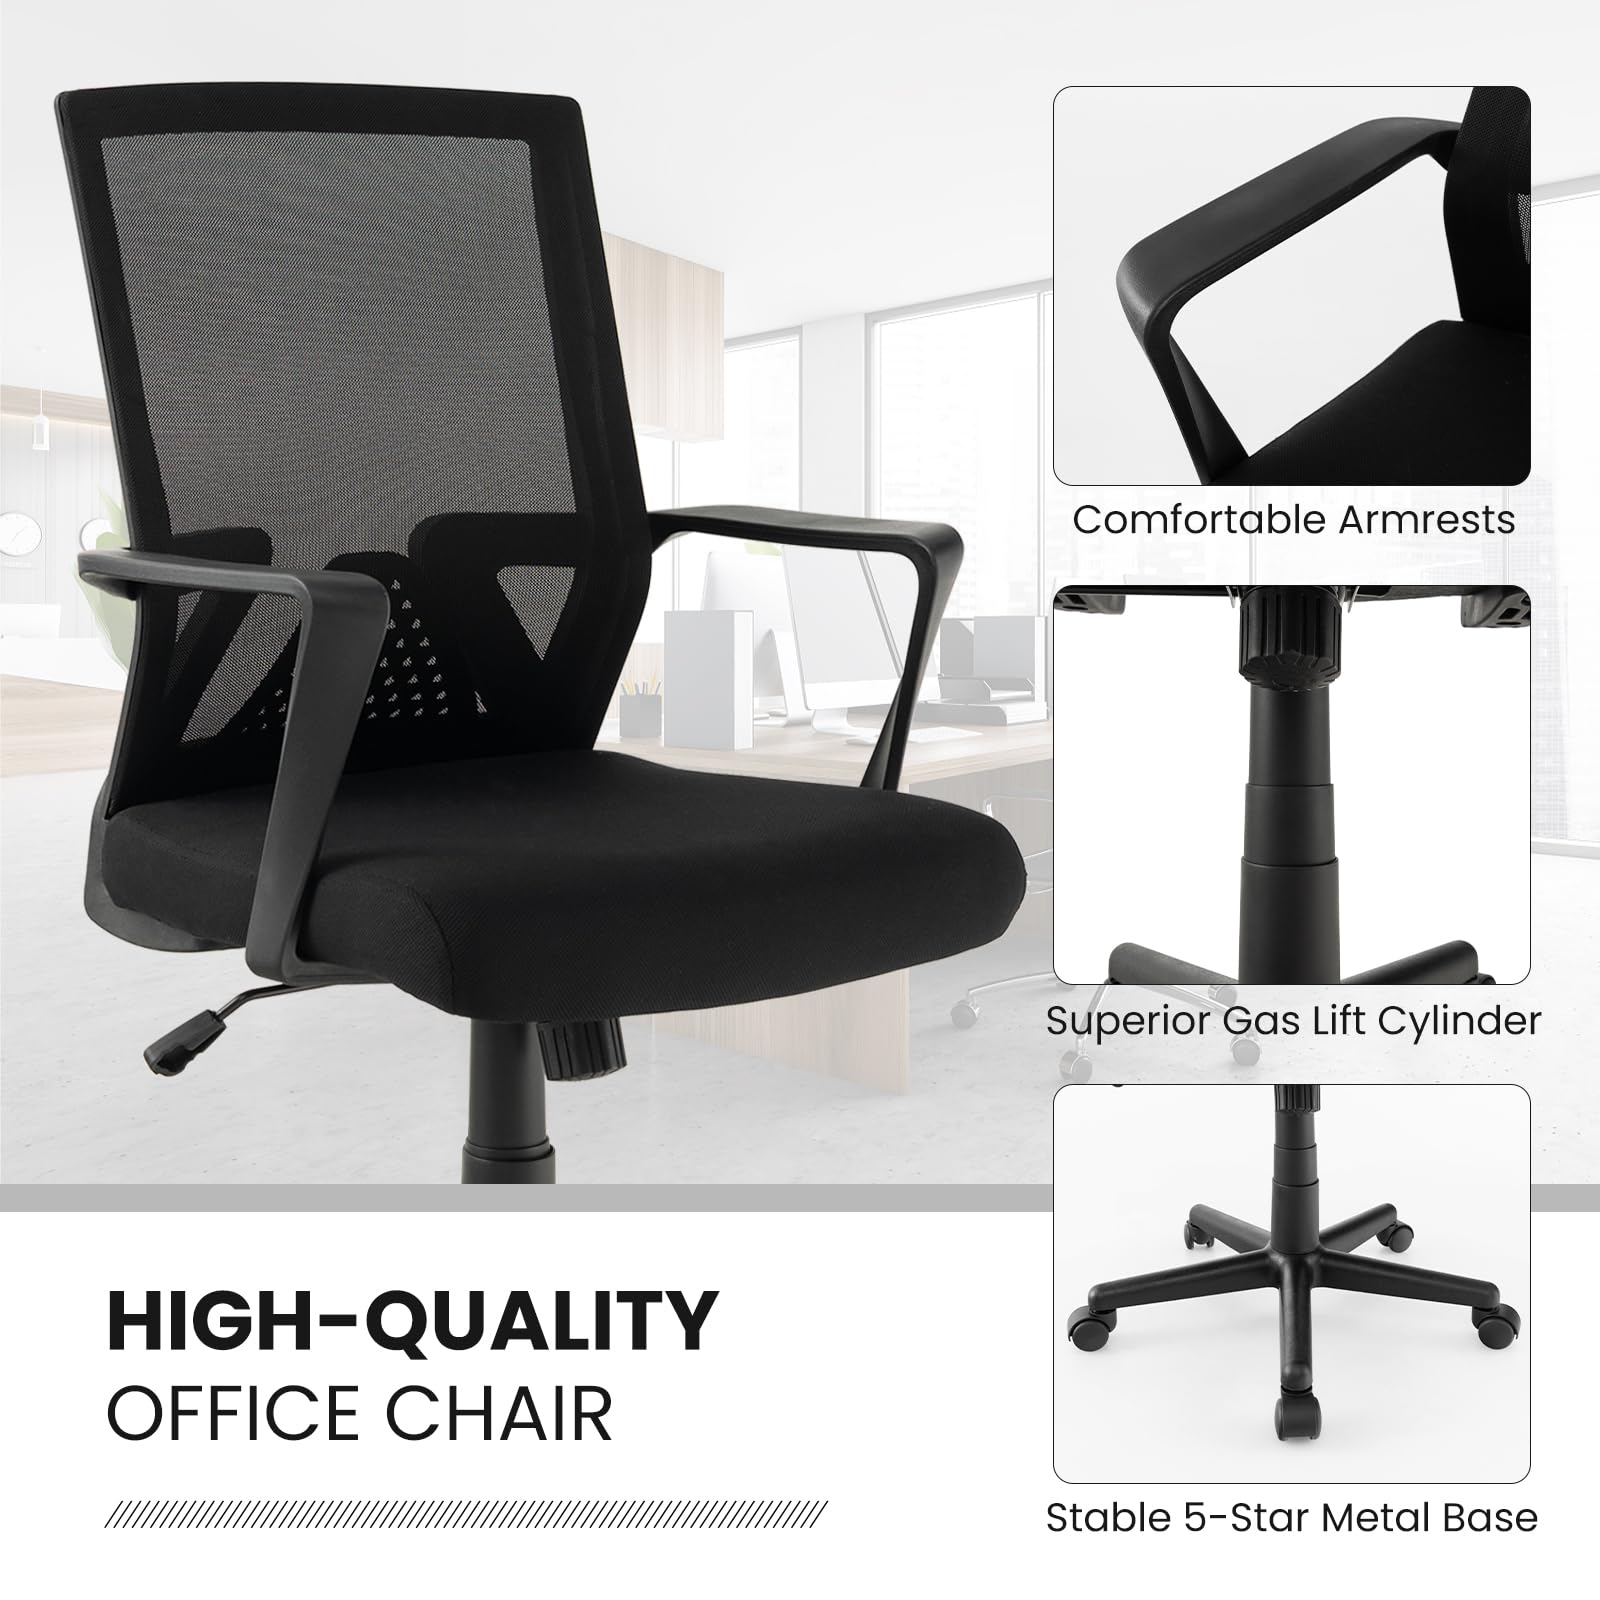 Giantex Office Desk Chair with Lumbar Support, Ergonomic Mesh Office Chair with Wheels and Armrests